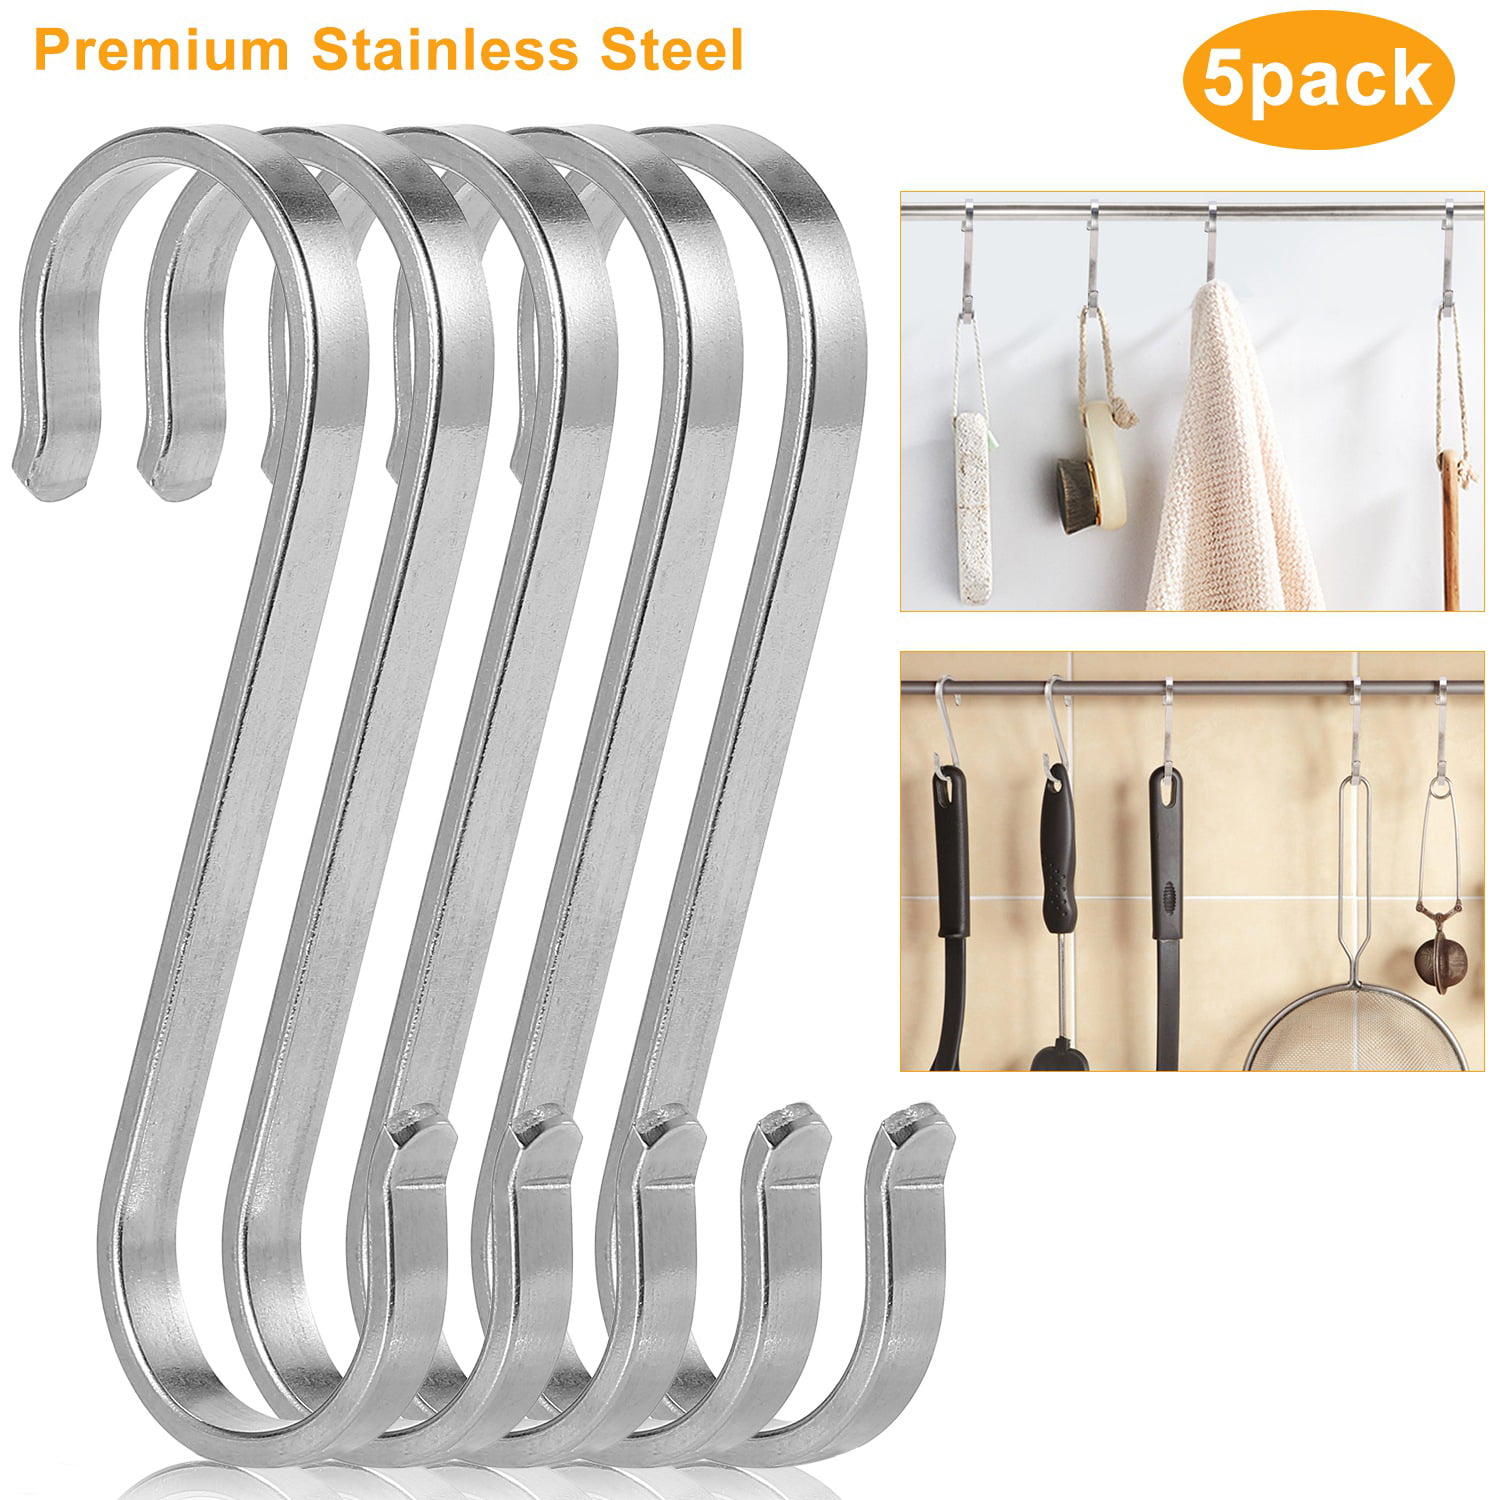 20 x HEAVY DUTY S HOOKS 32mm Strong Metal Light Chain/Rail Link Connectors Clips 